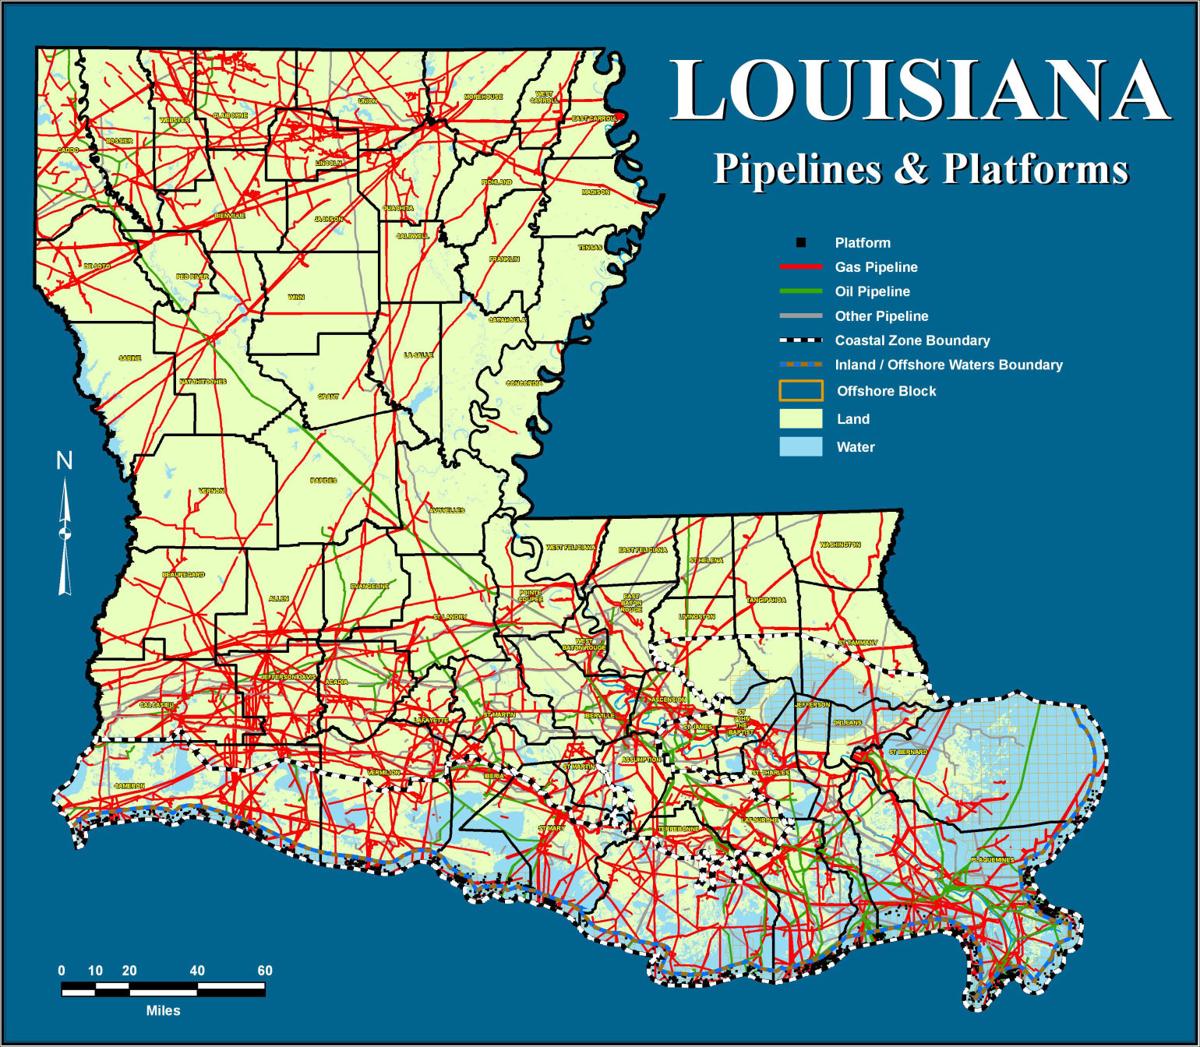 Phillips 66 Pipeline Fire And Bayou Bridge Project See Map Of